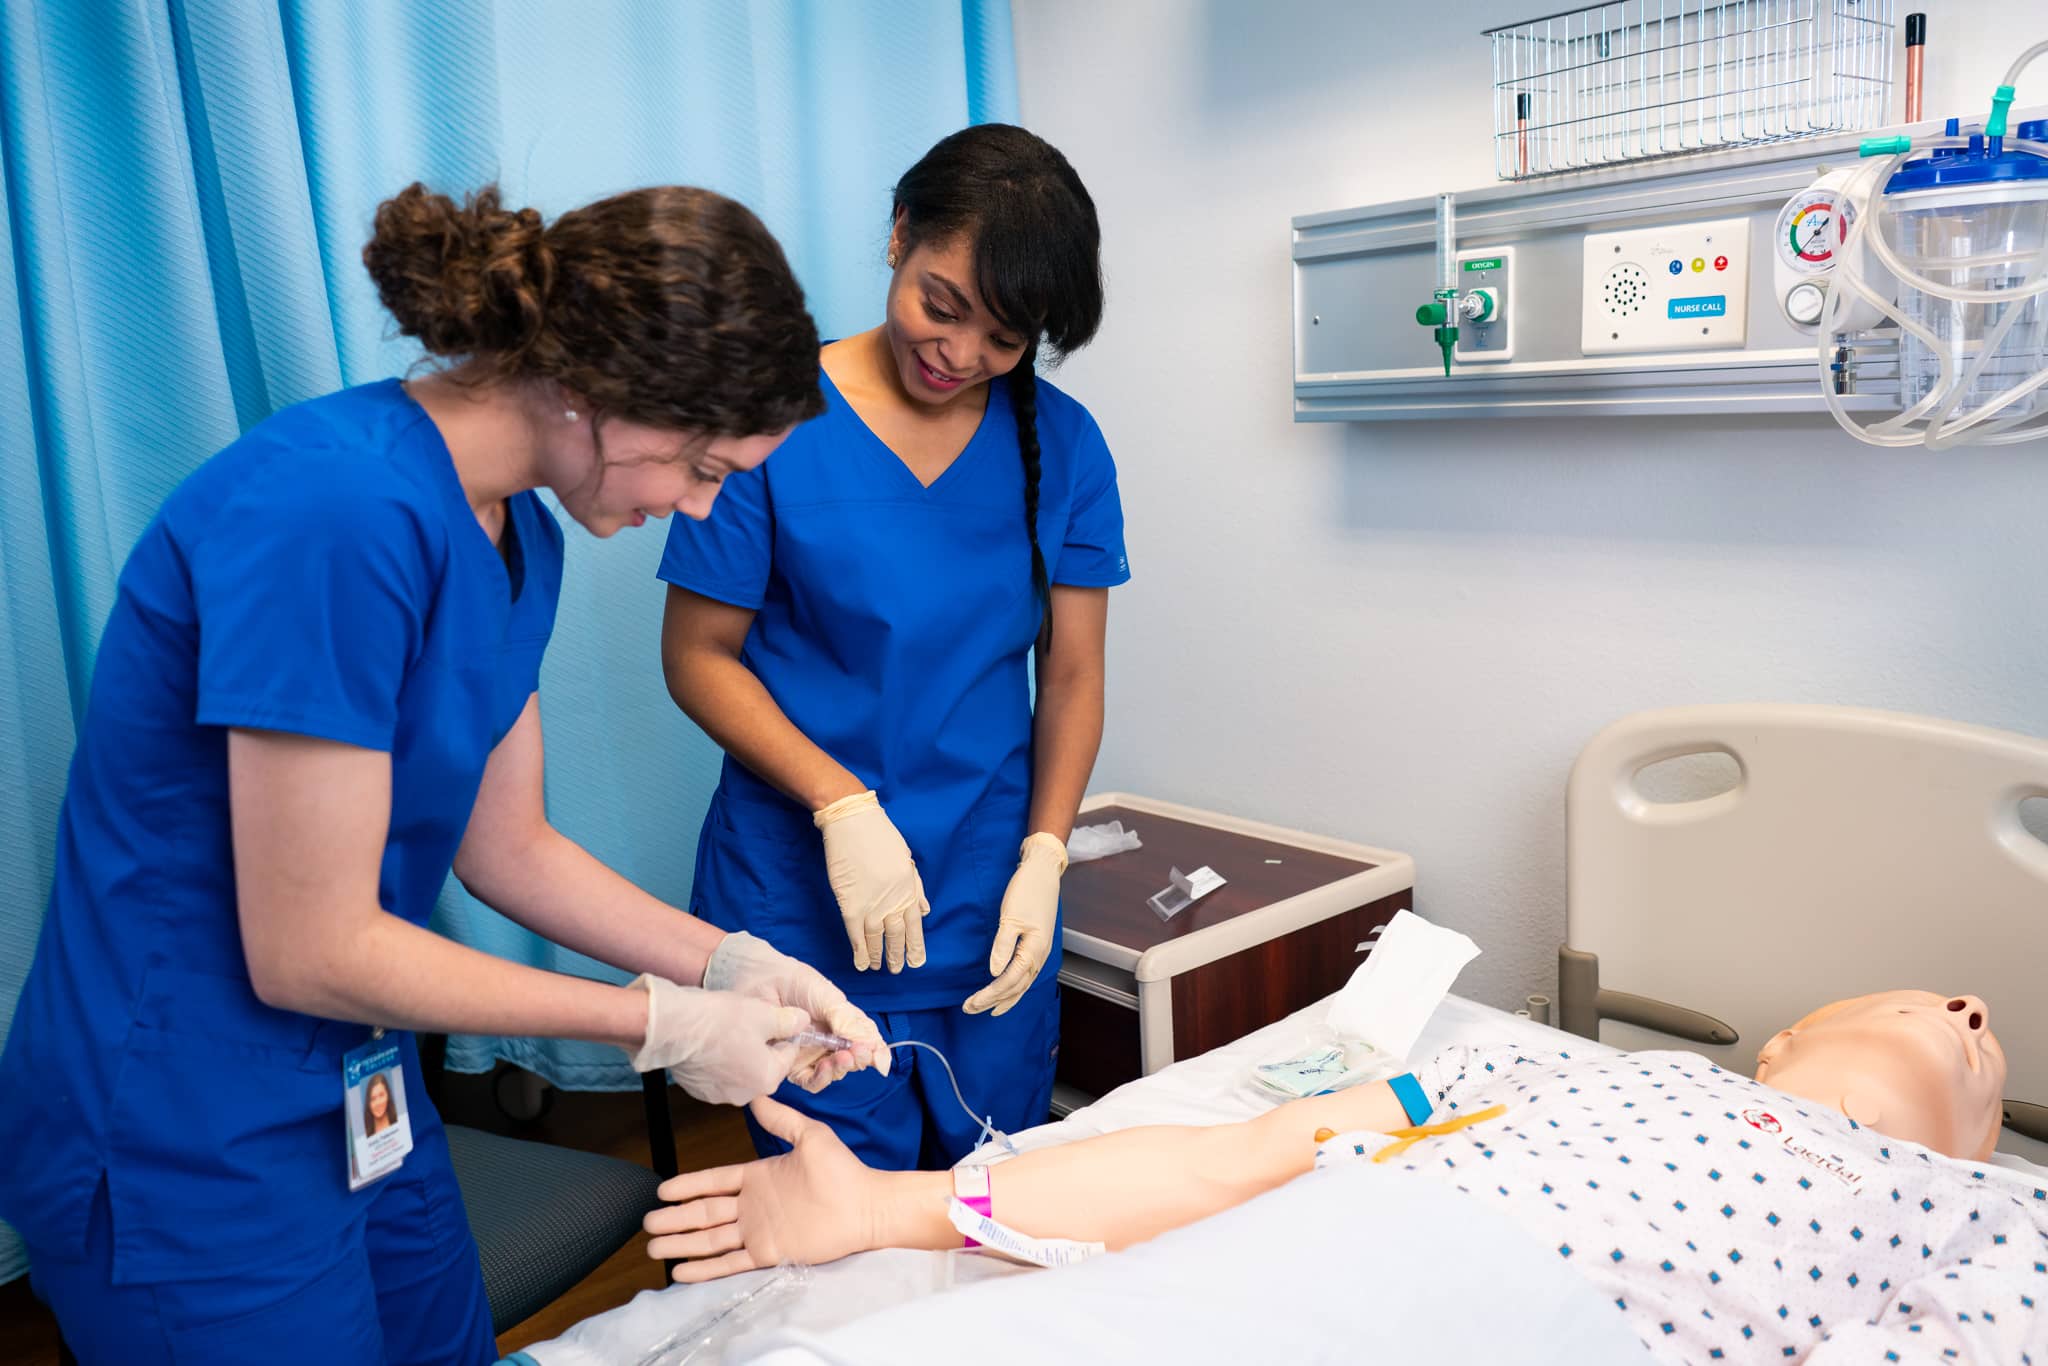 Learn in a state of the art skills lab while earning an associate degree in nursing at Texarkana College.